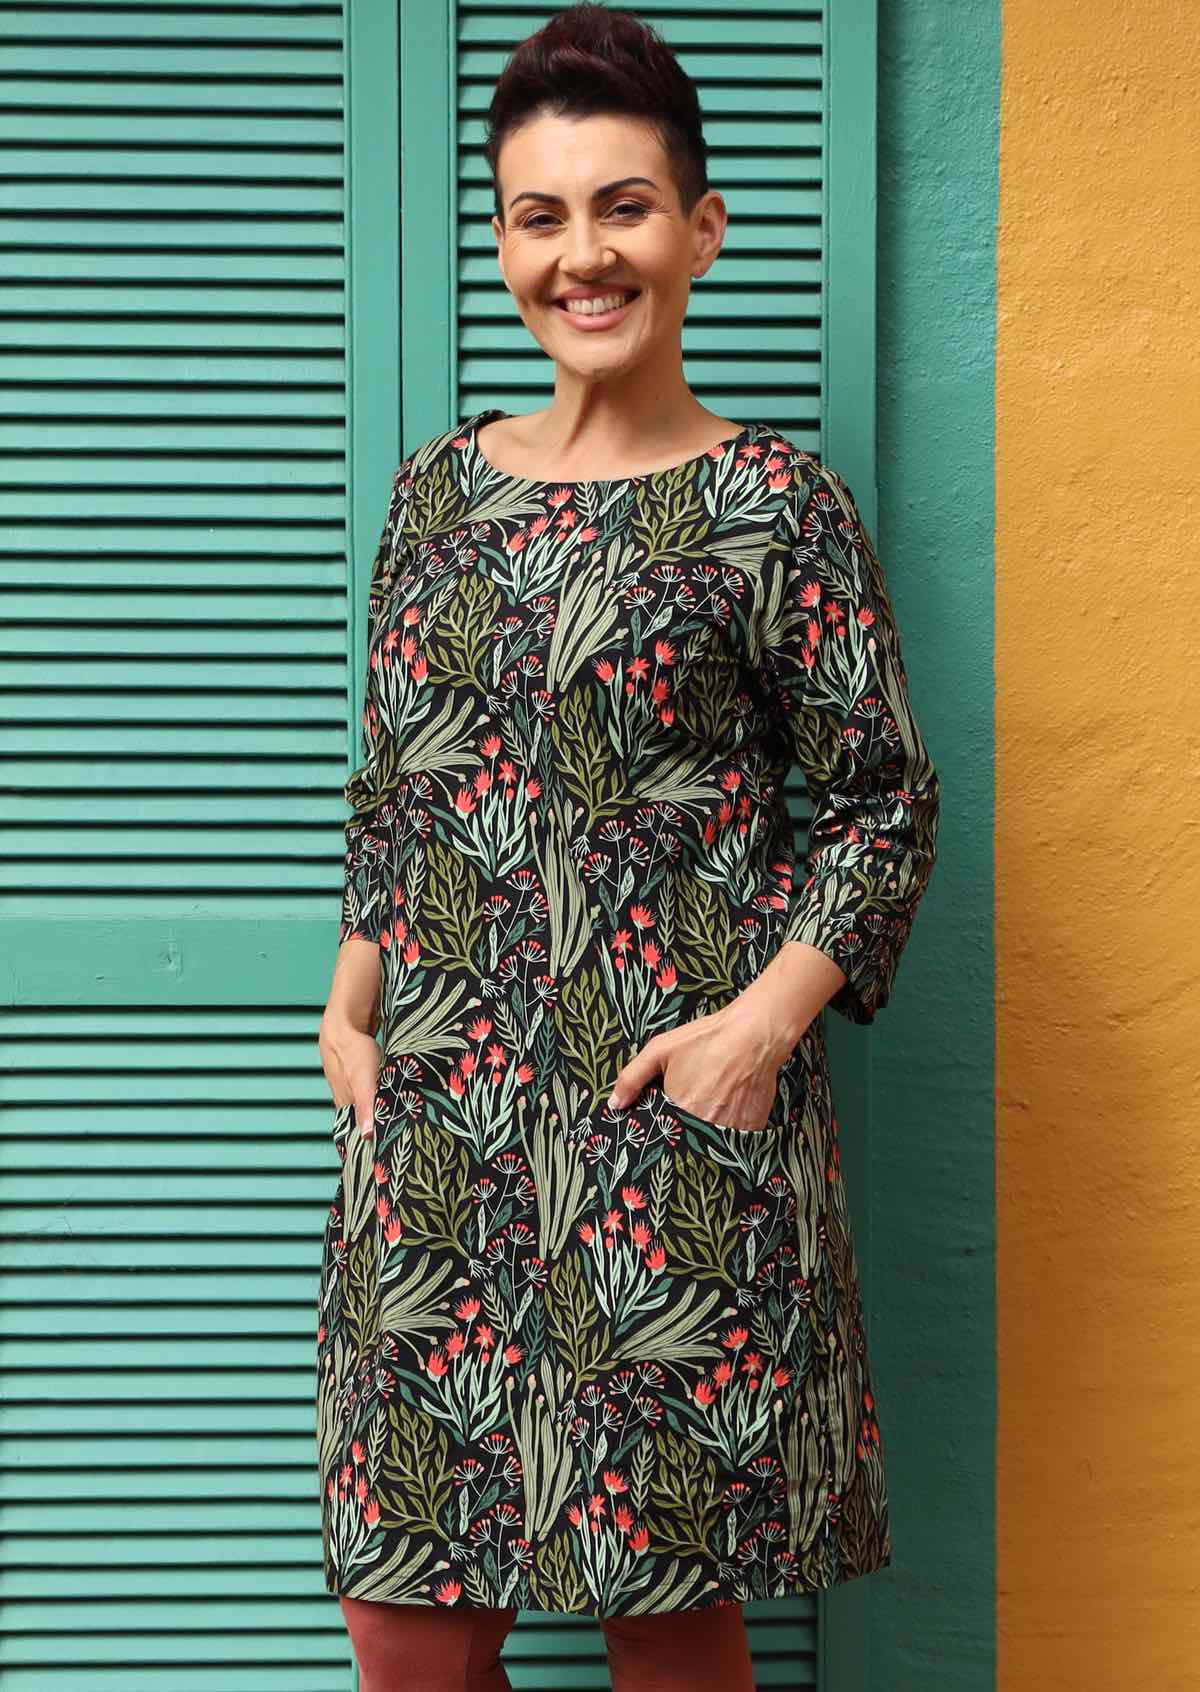 Jamie Dress round neck 3/4 sleeve cuff detail fitted bodice a-line skirt pockets knee length 100% cotton black background green and pink peach floral print | Karma East Australia